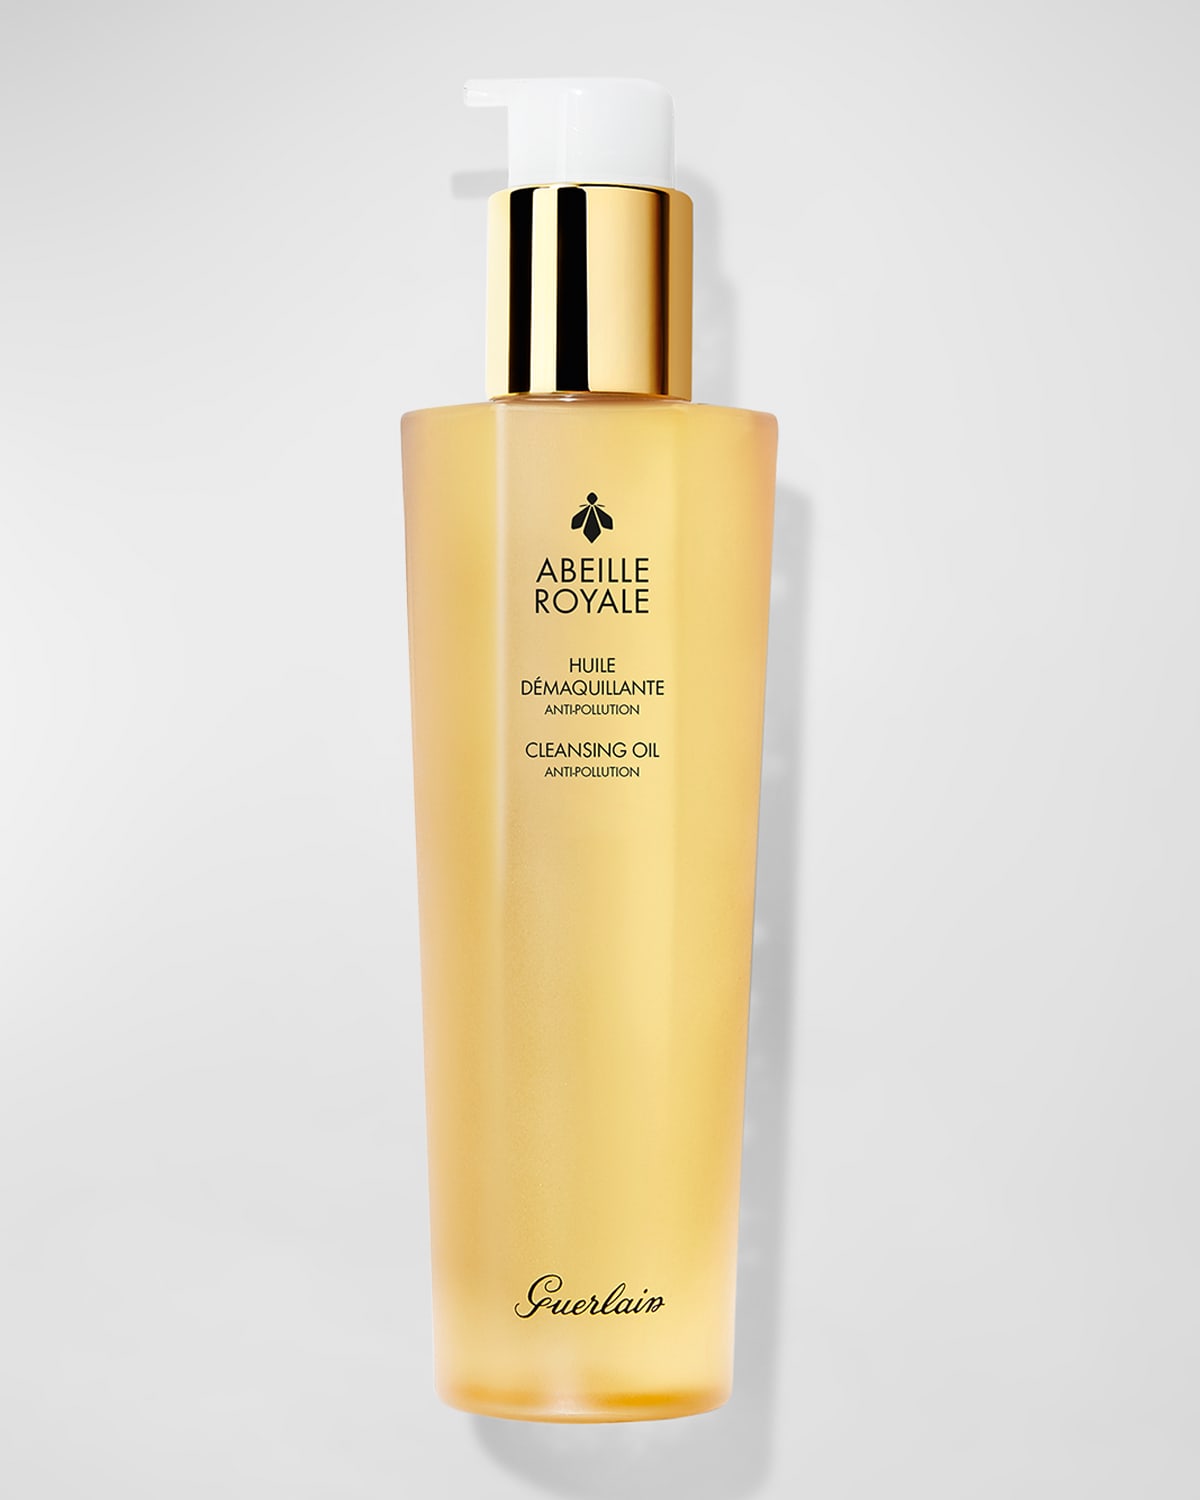 Abeille Royale Anti-Pollution Cleansing Oil, 5 oz.